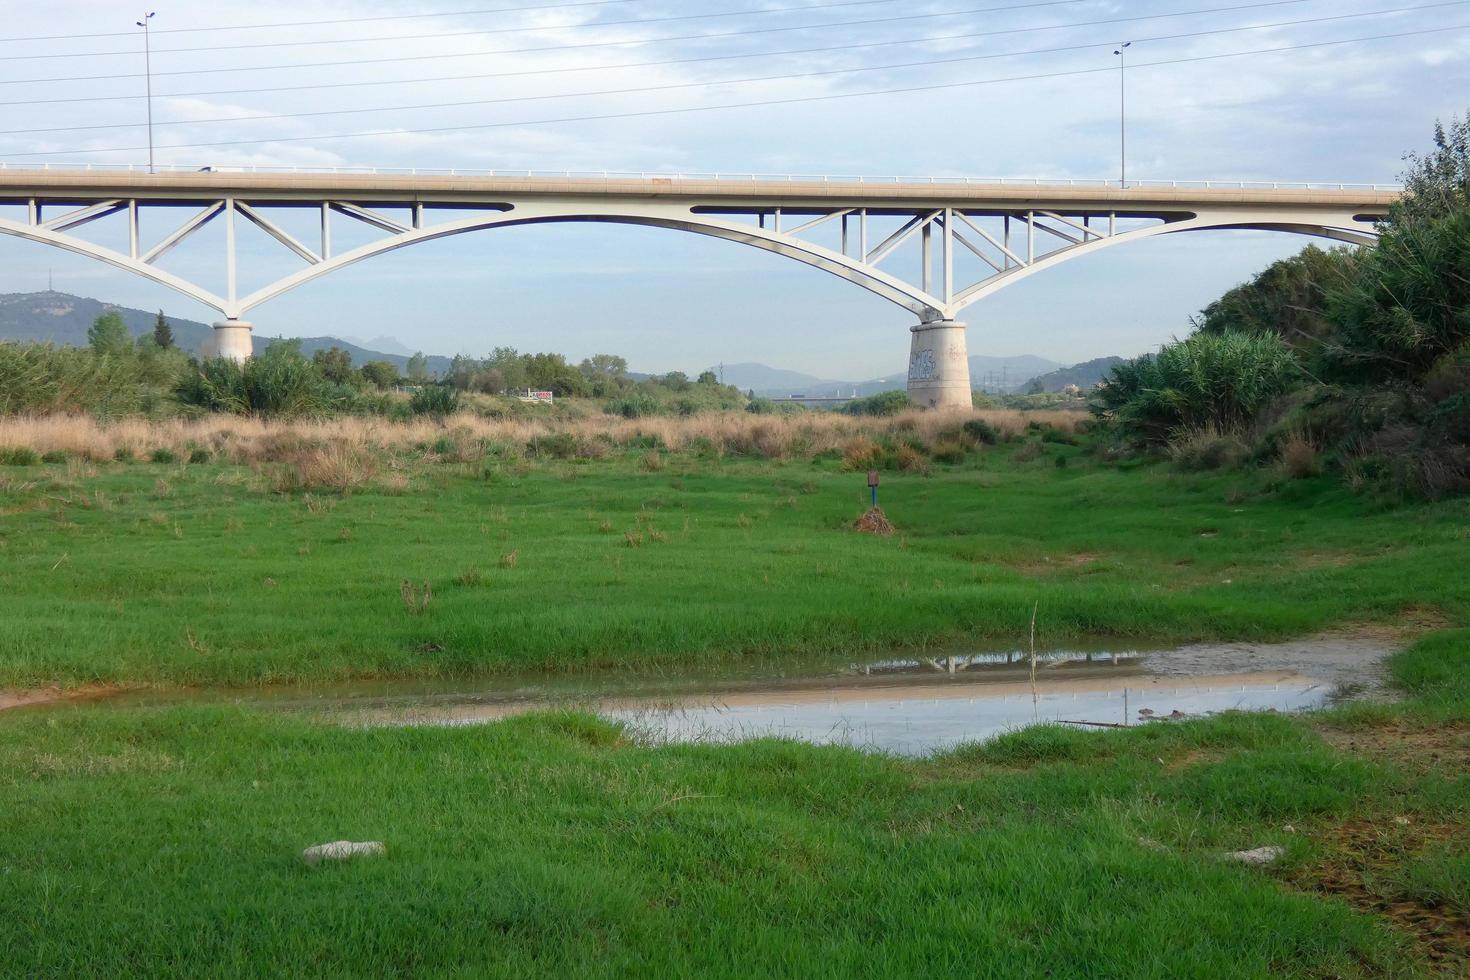 Bridge over the Llobregat river, engineering work for the passage of cars, trucks and buses. photo